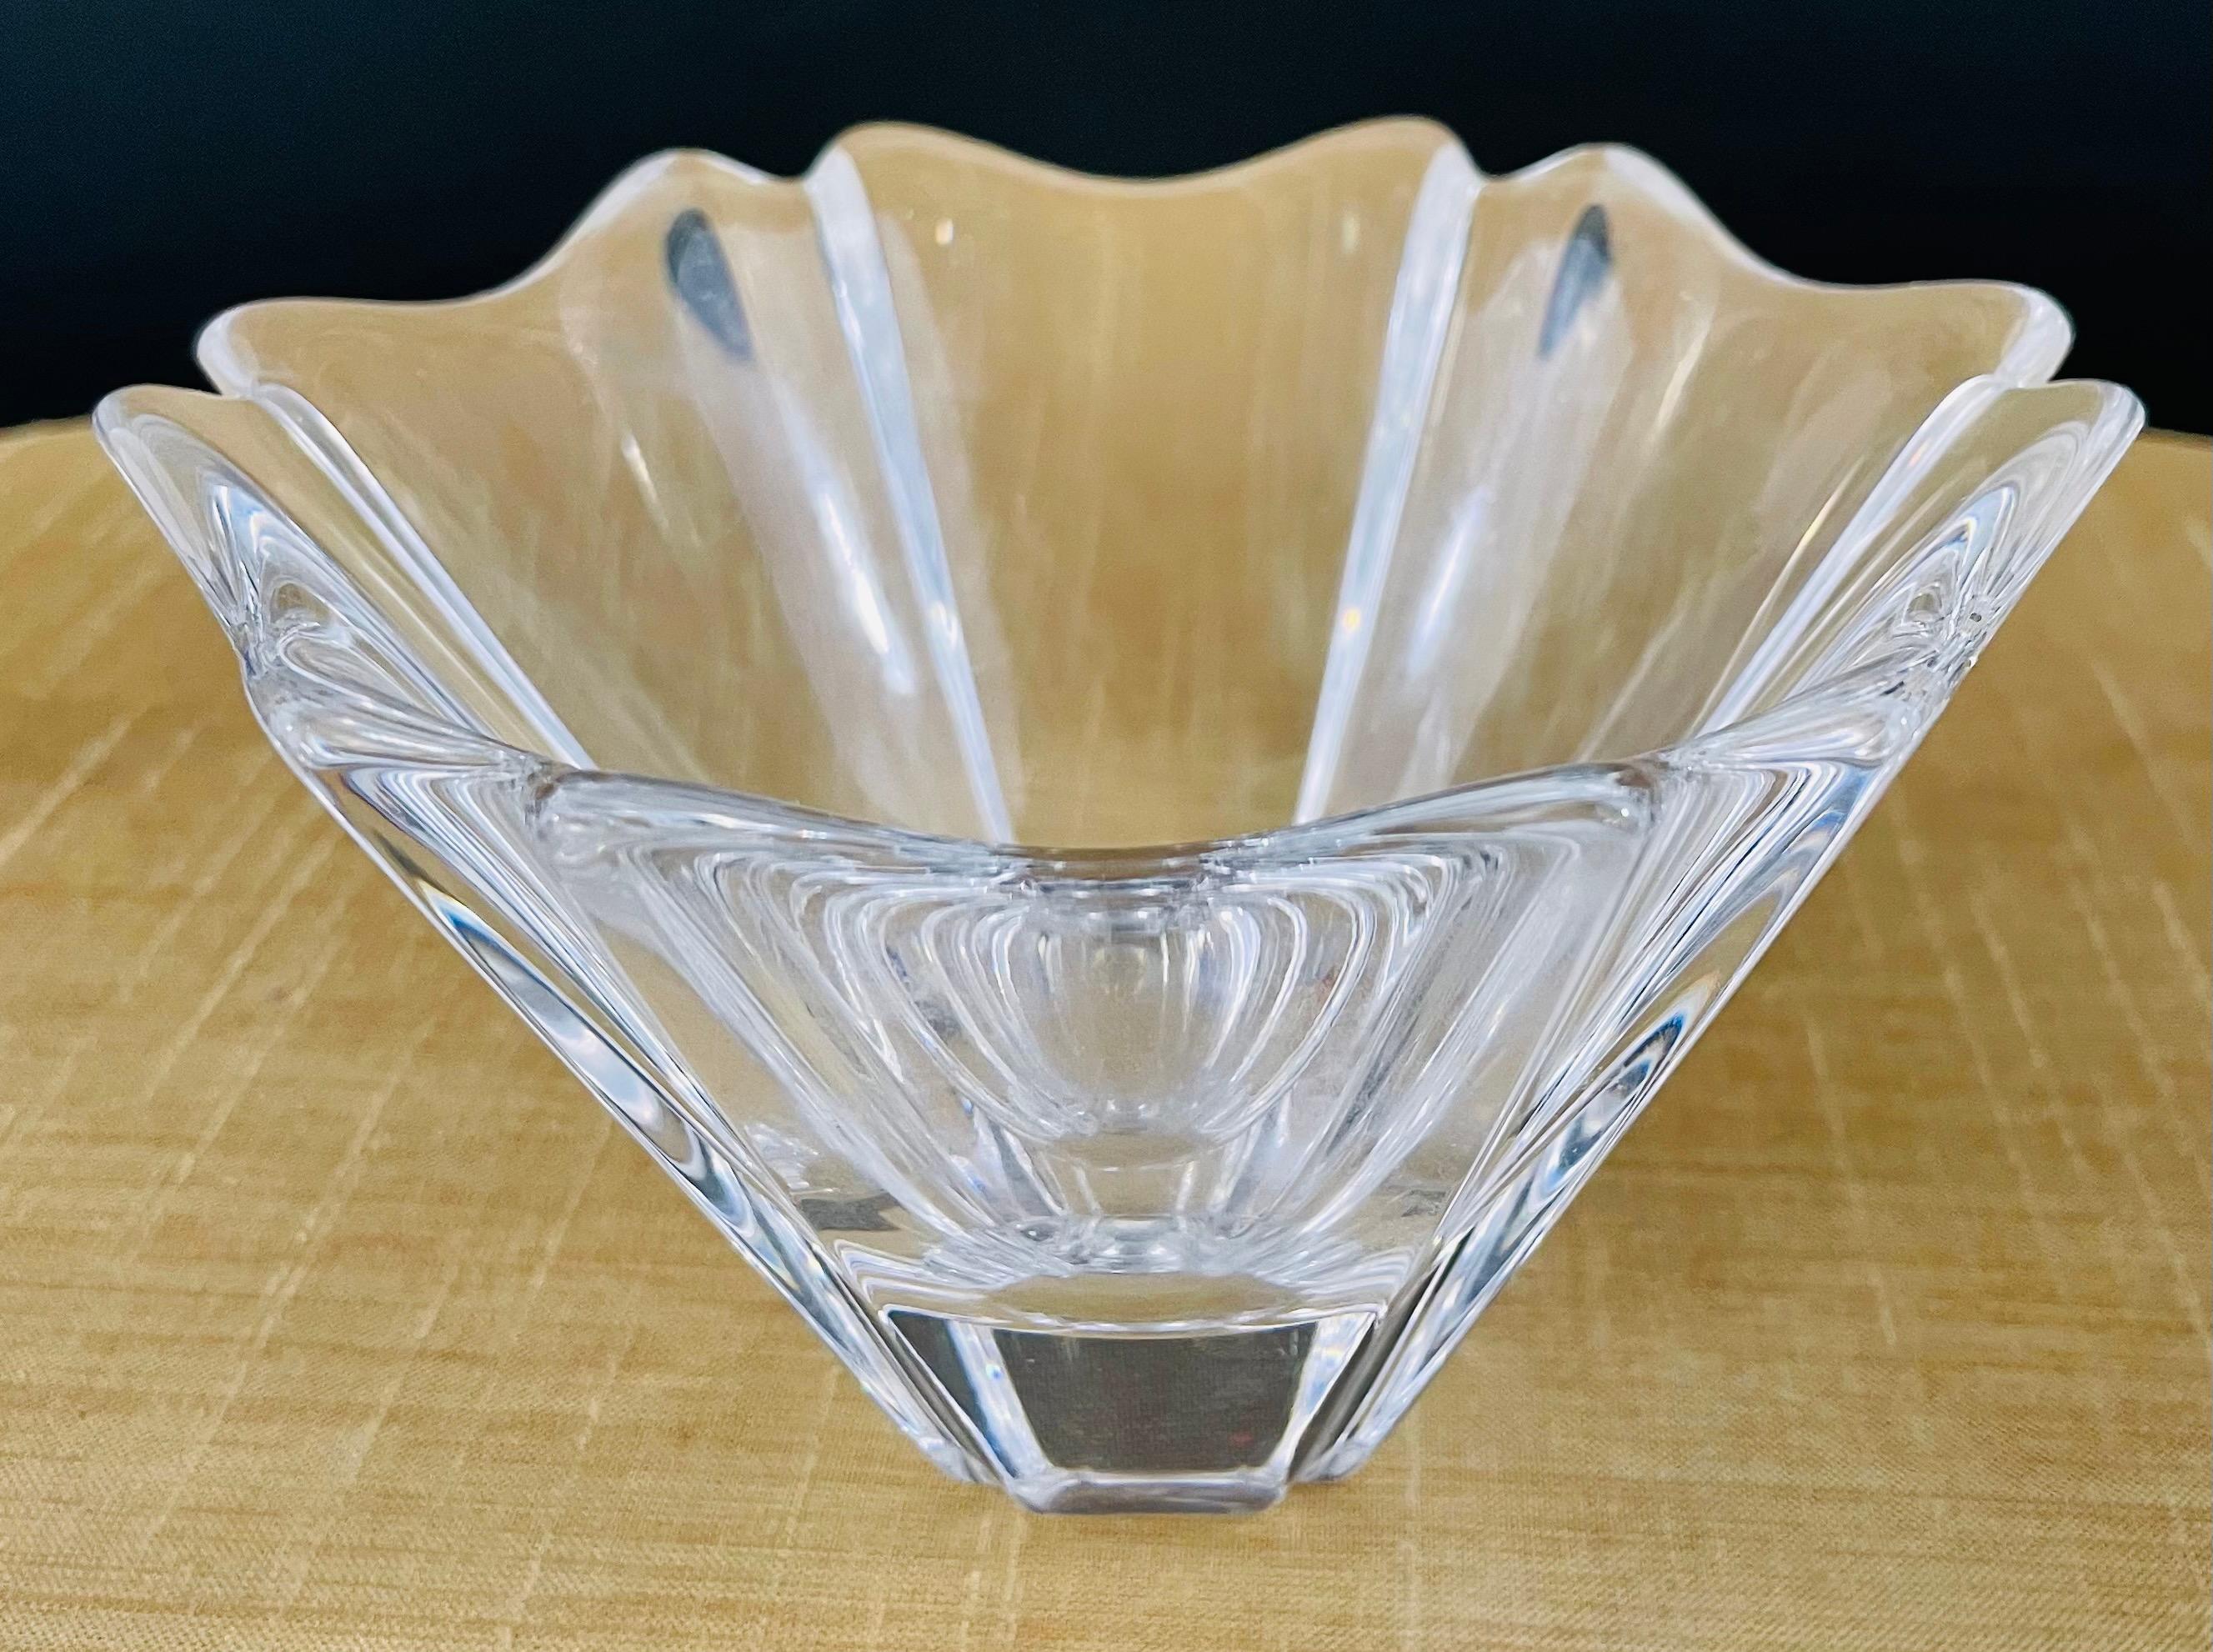 Crystal Small Dishes or Ashtrays, a Set of 7 3